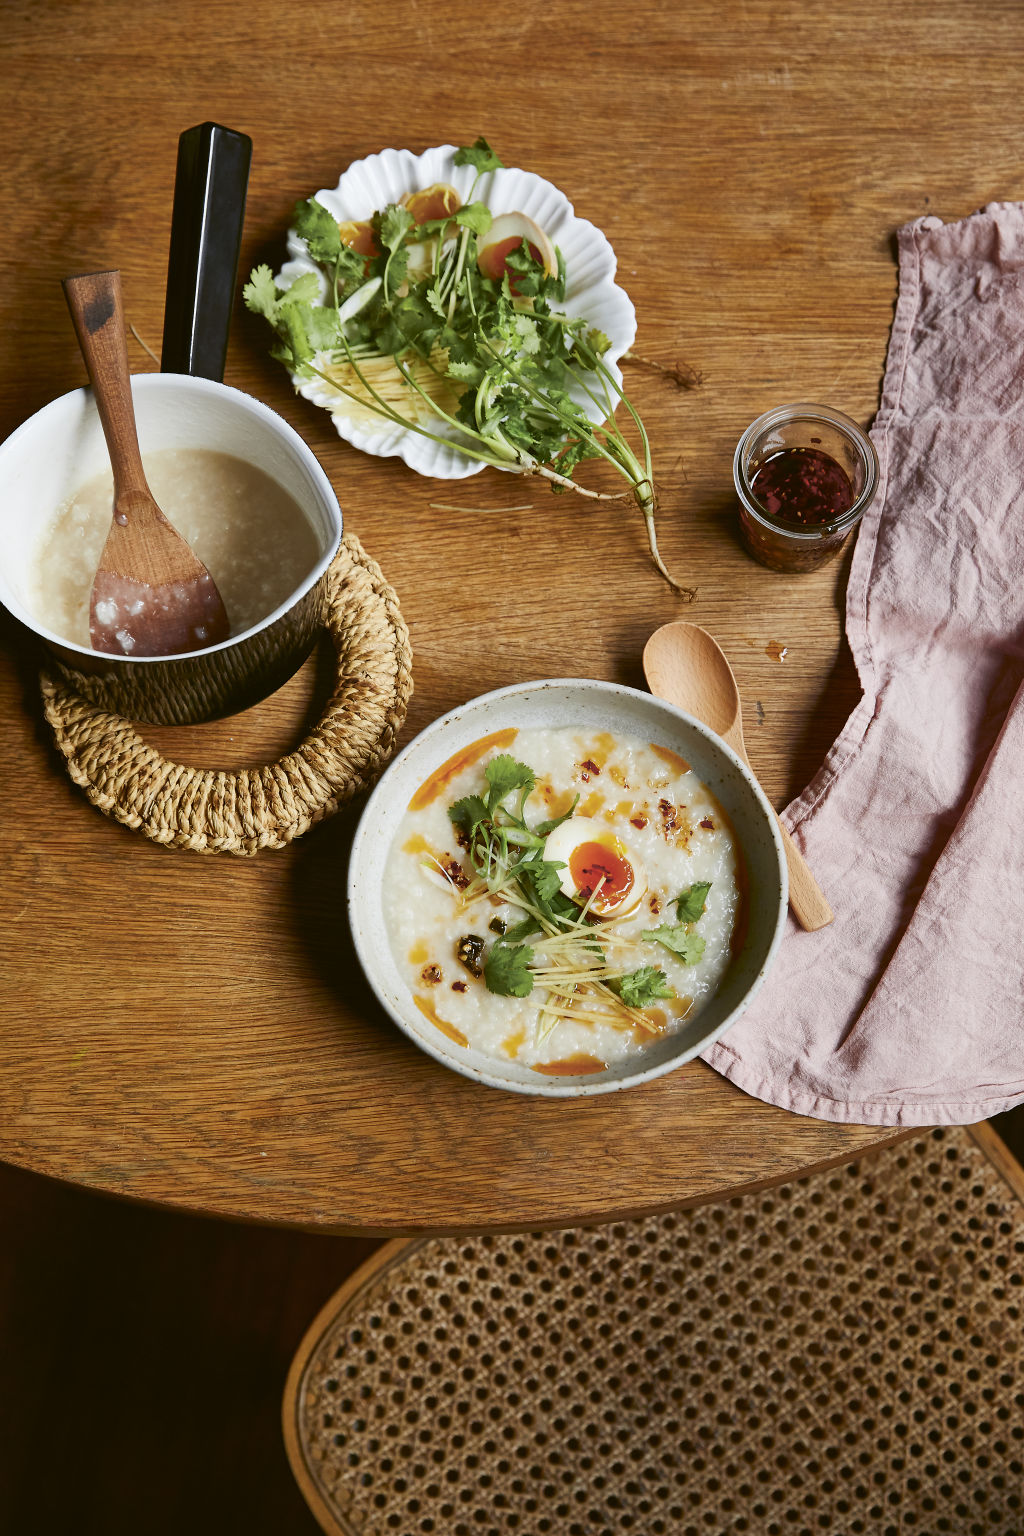 Spring congee from 'A Year of Simple Family Food' by Julia Busuttil Nishimura (Plum/Pan Macmillan). Photo: Armelle Habib